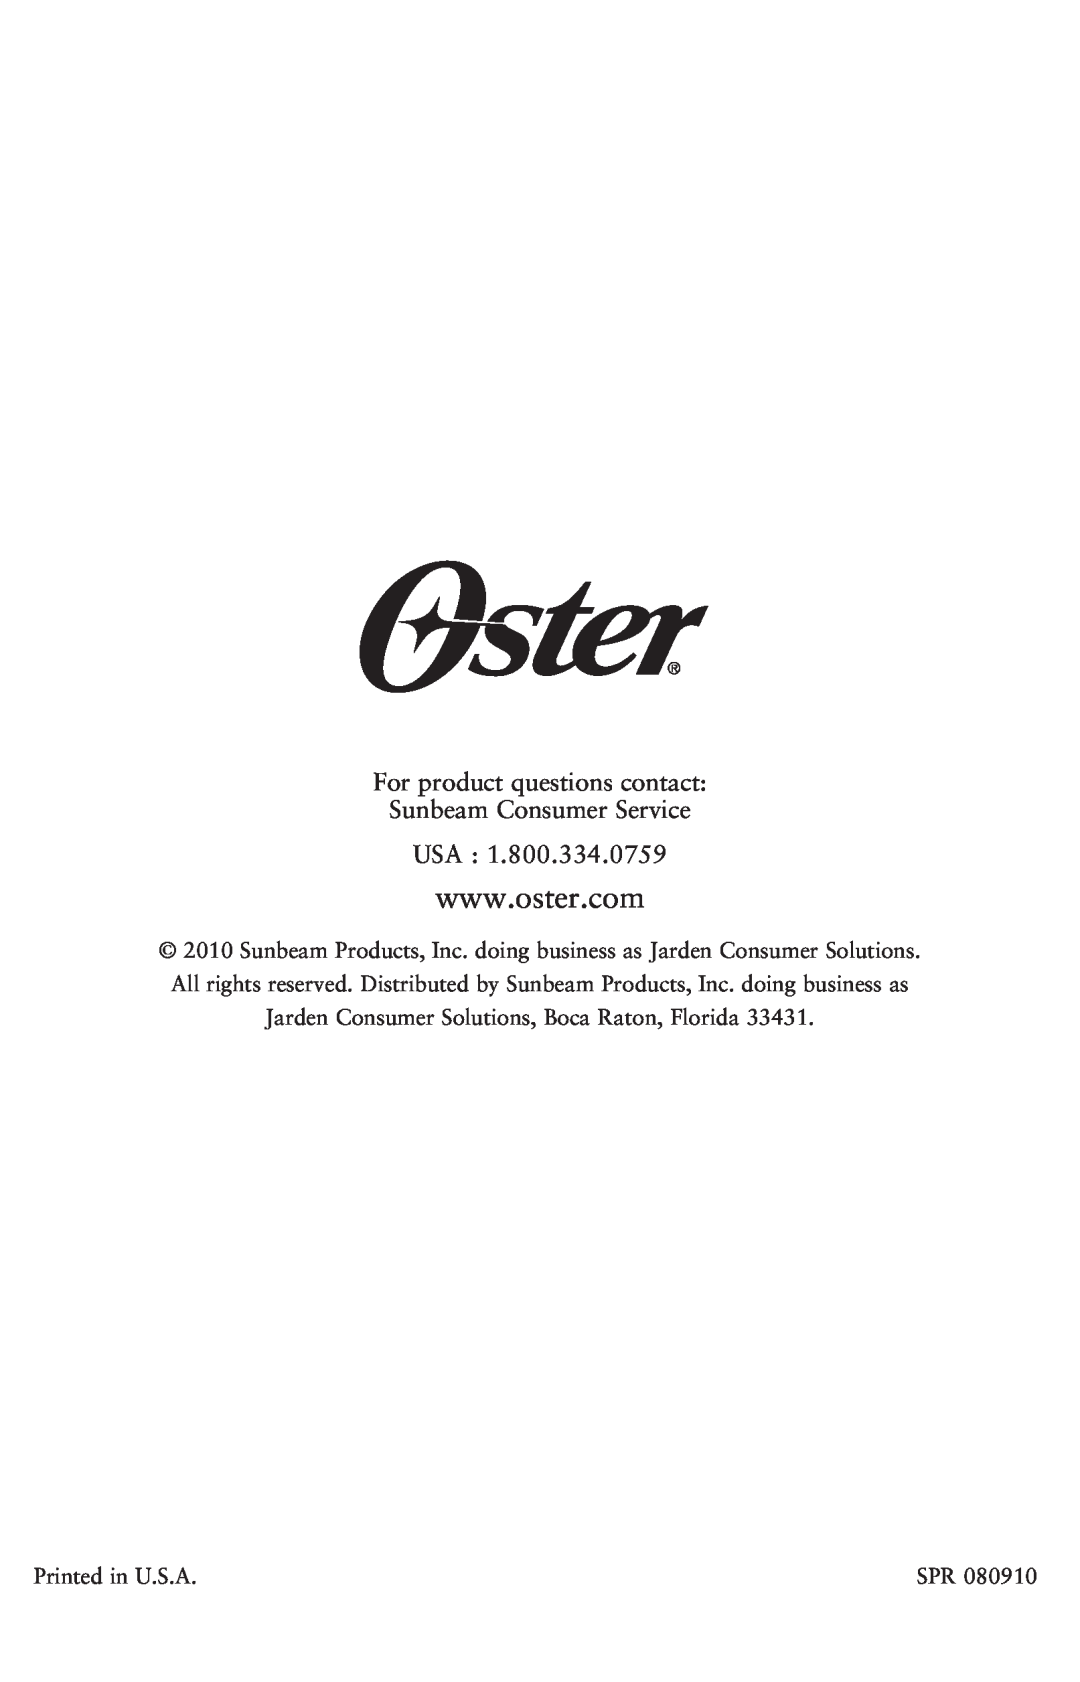 Oster BLSTMG-W For product questions contact Sunbeam Consumer Service USA, Jarden Consumer Solutions, Boca Raton, Florida 